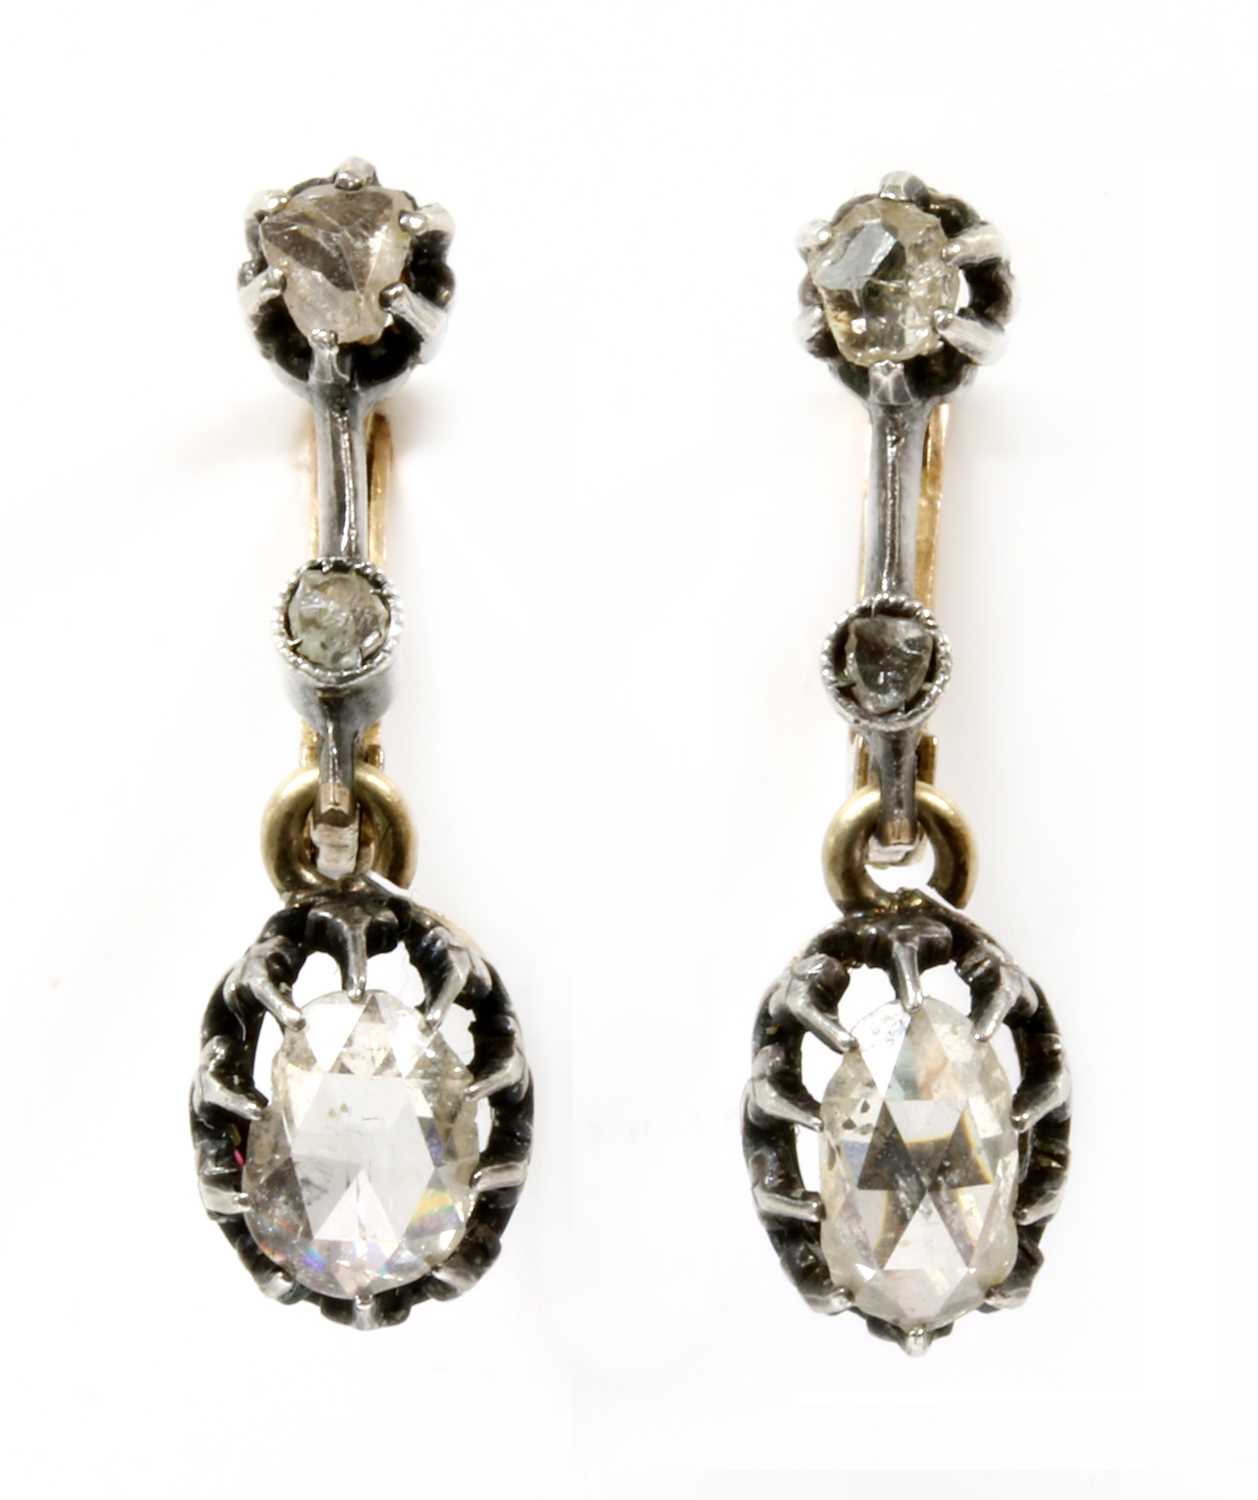 A pair of silver and gold rose cut diamond earrings,